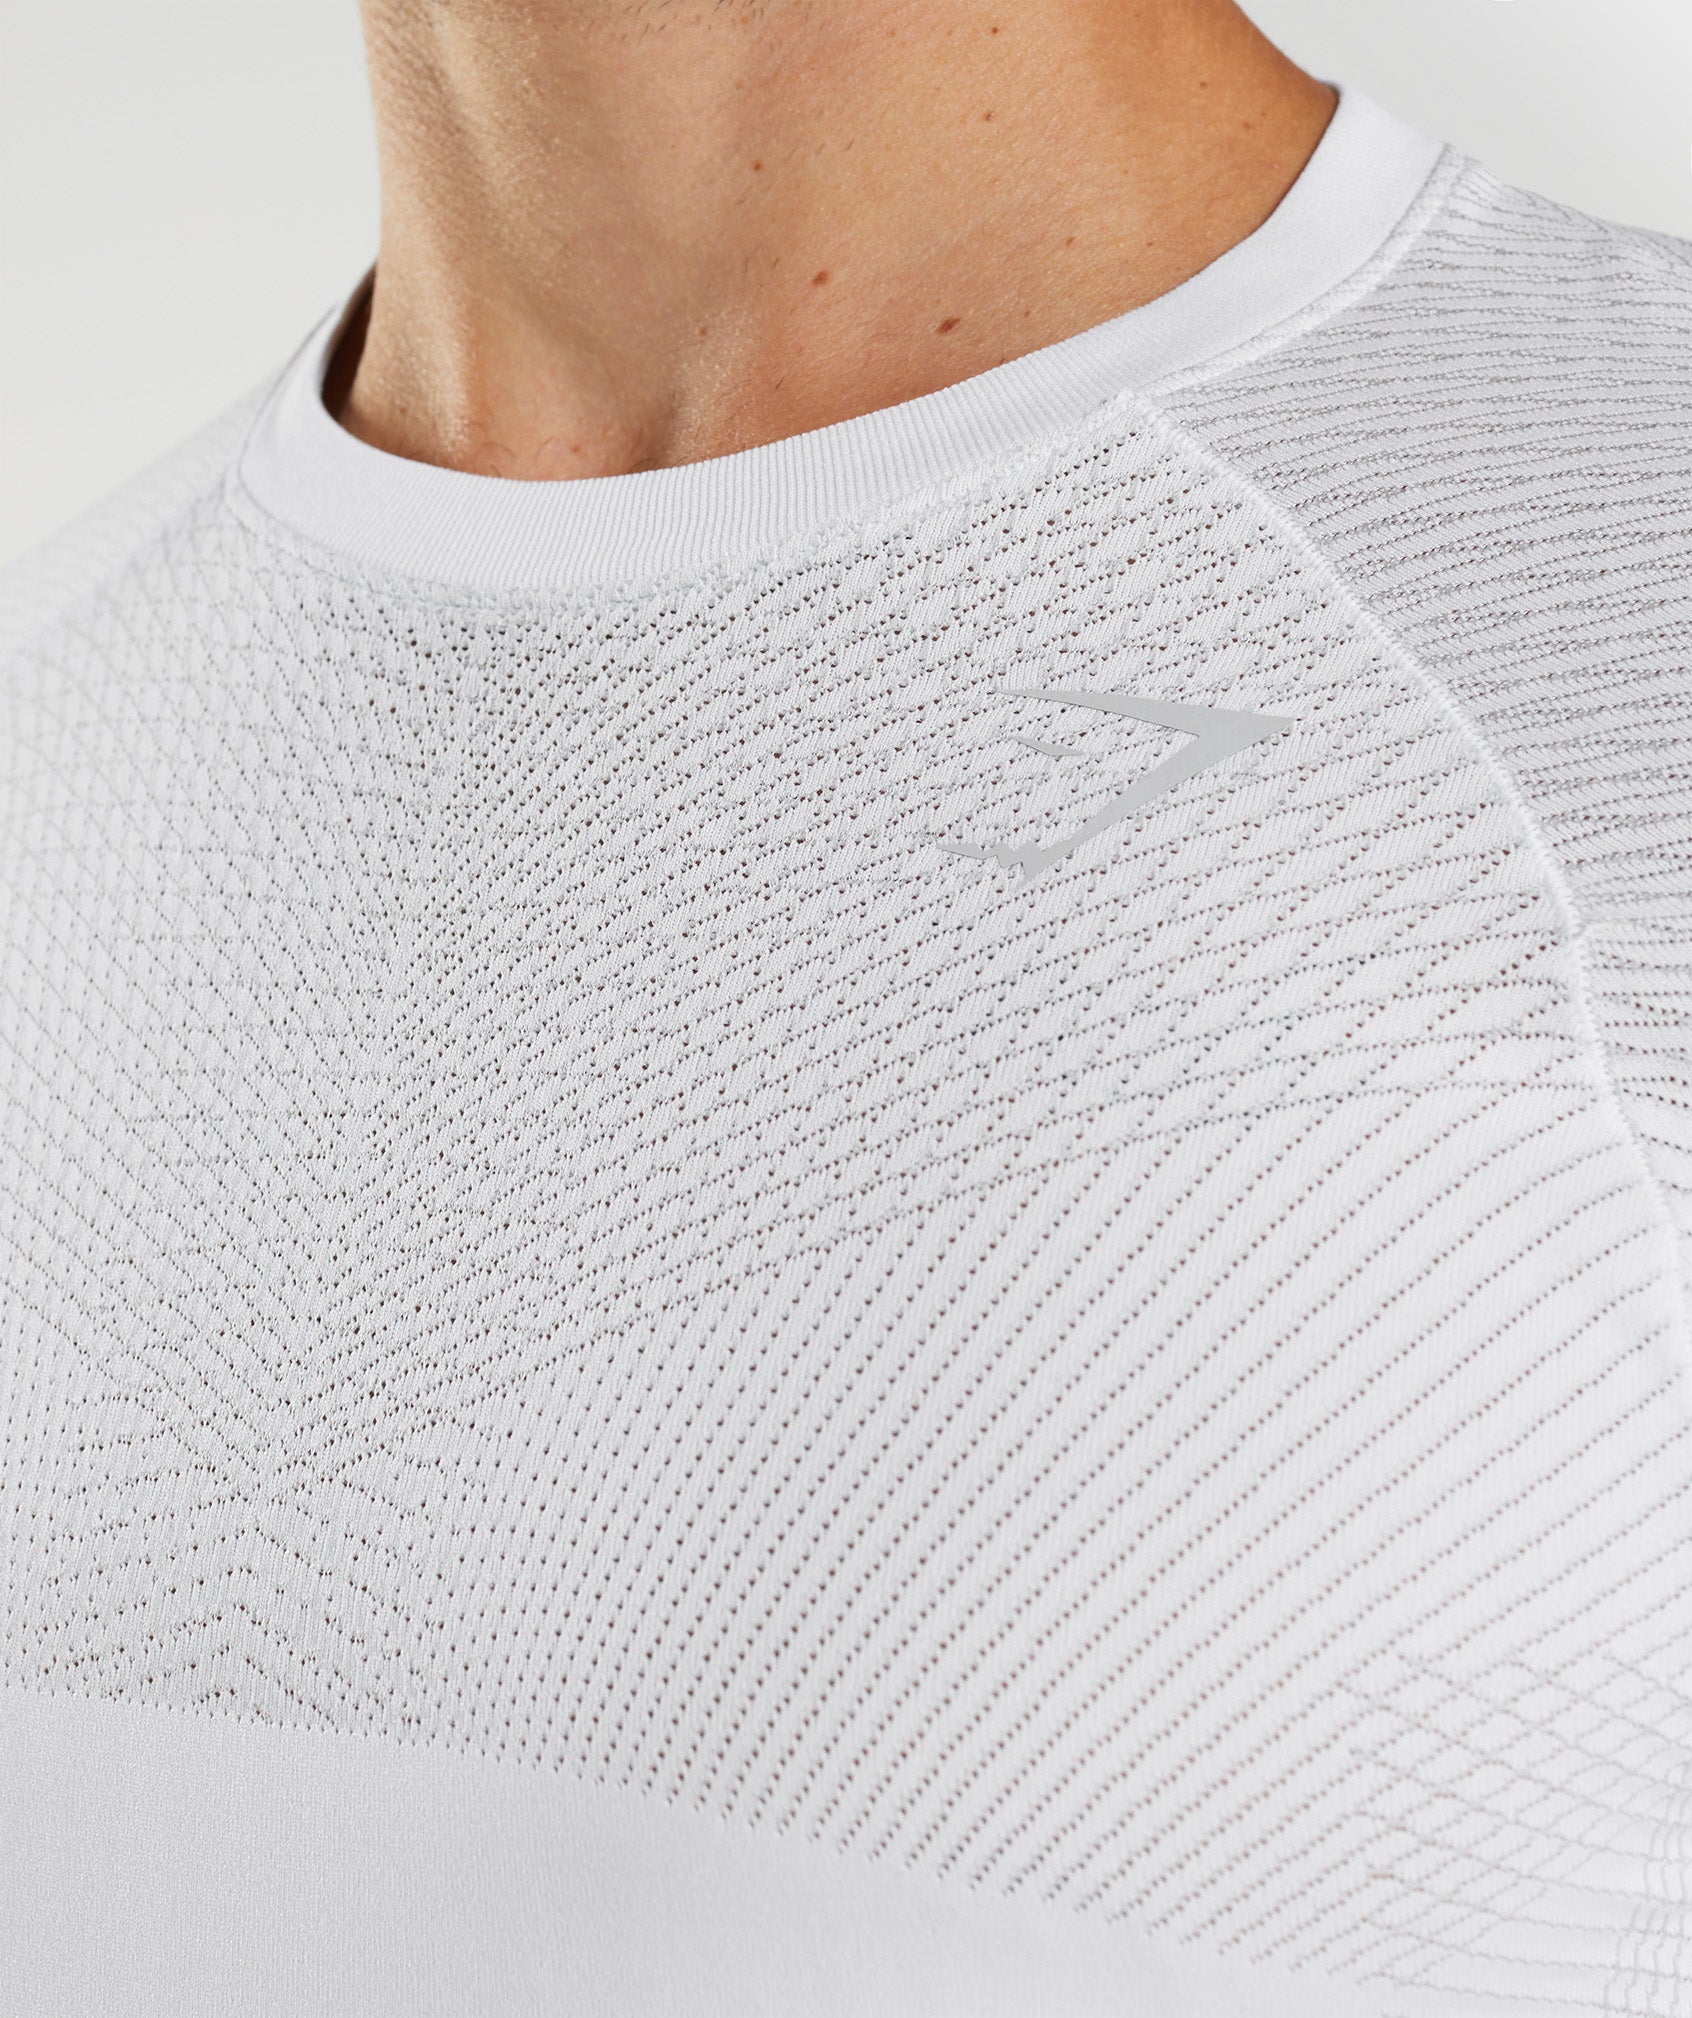 Apex Seamless T-Shirt in White/Light Grey - view 6